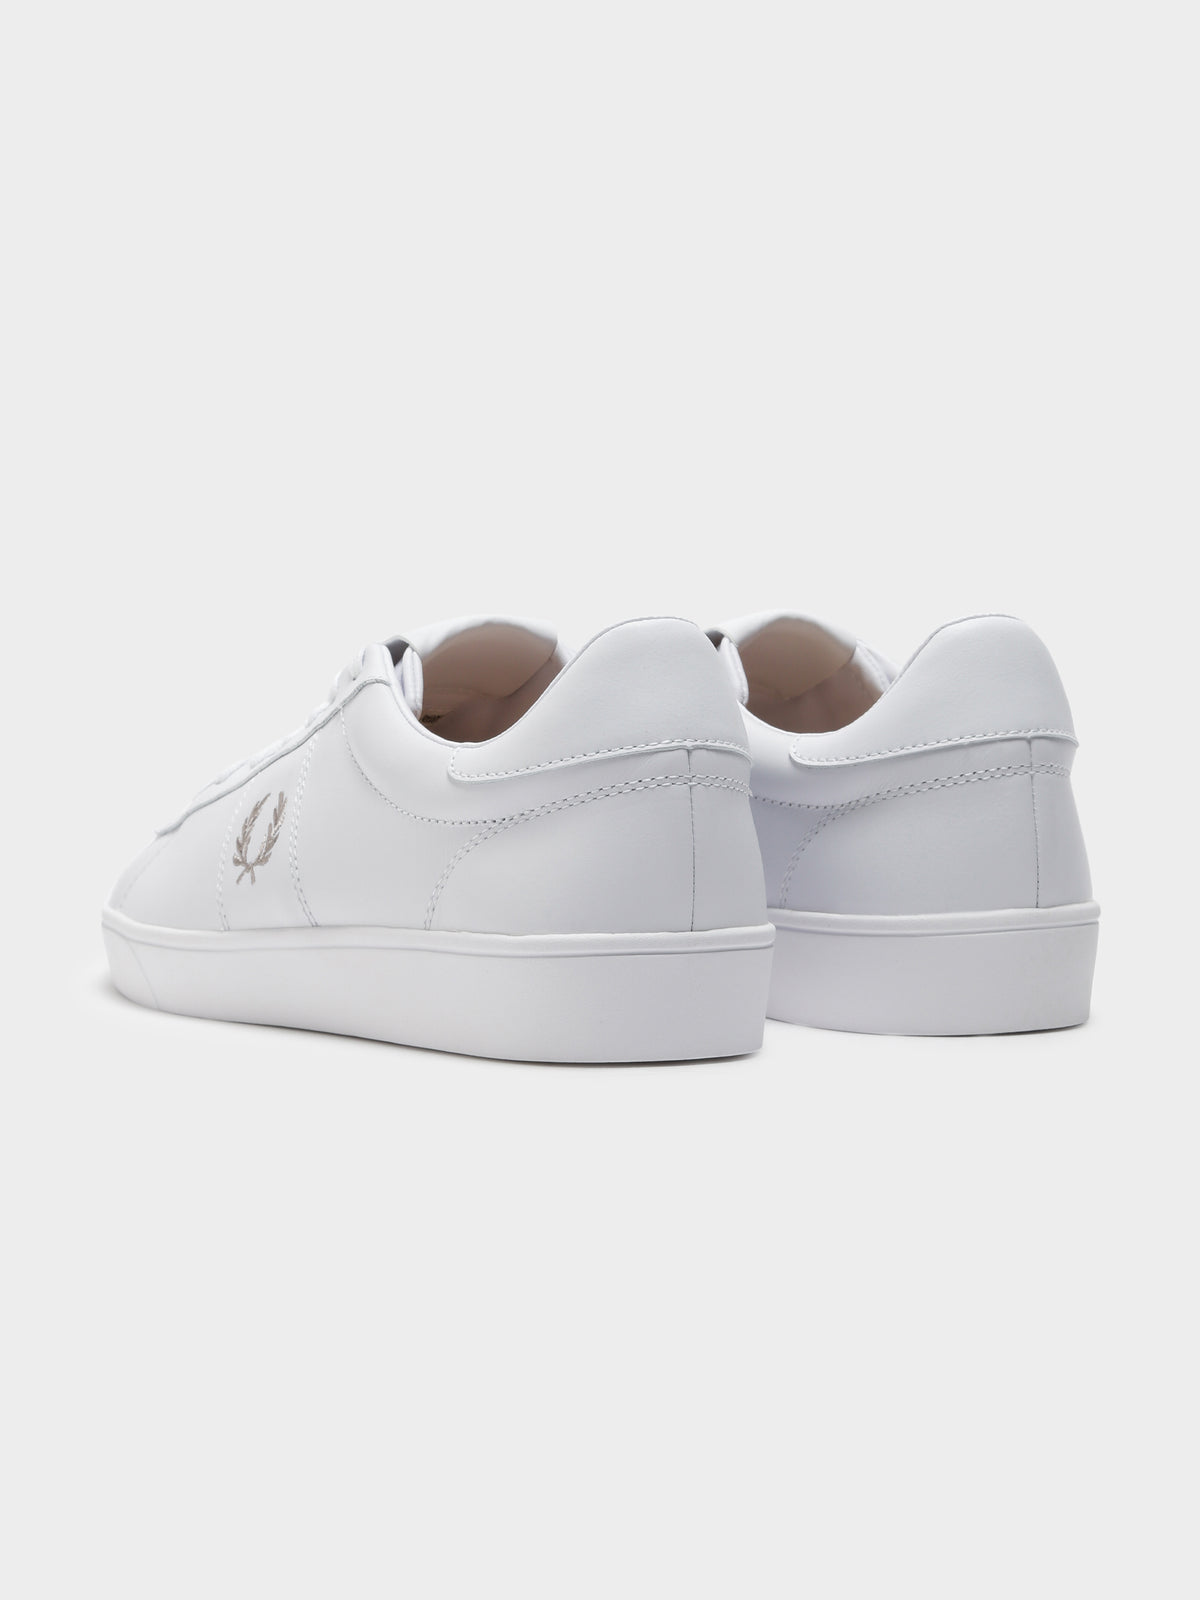 Mens Spencer Leather Sneakers in White